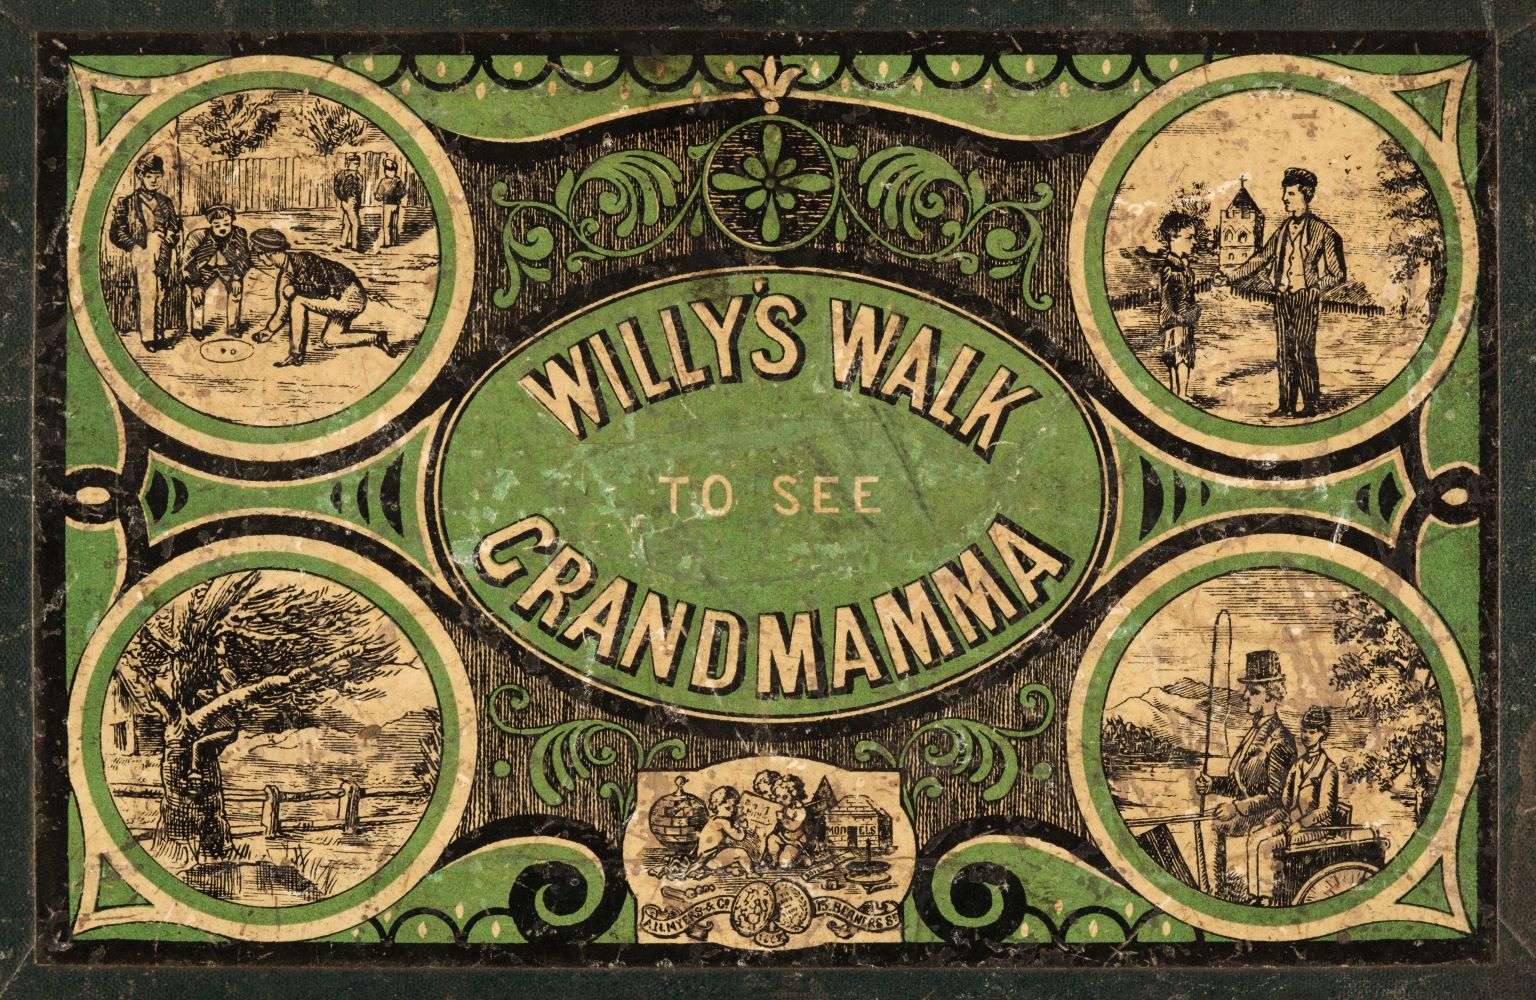 Moral Race Game. Willy's Walk to see Grandmamma, London: A. N. Myers & Co., [1869],